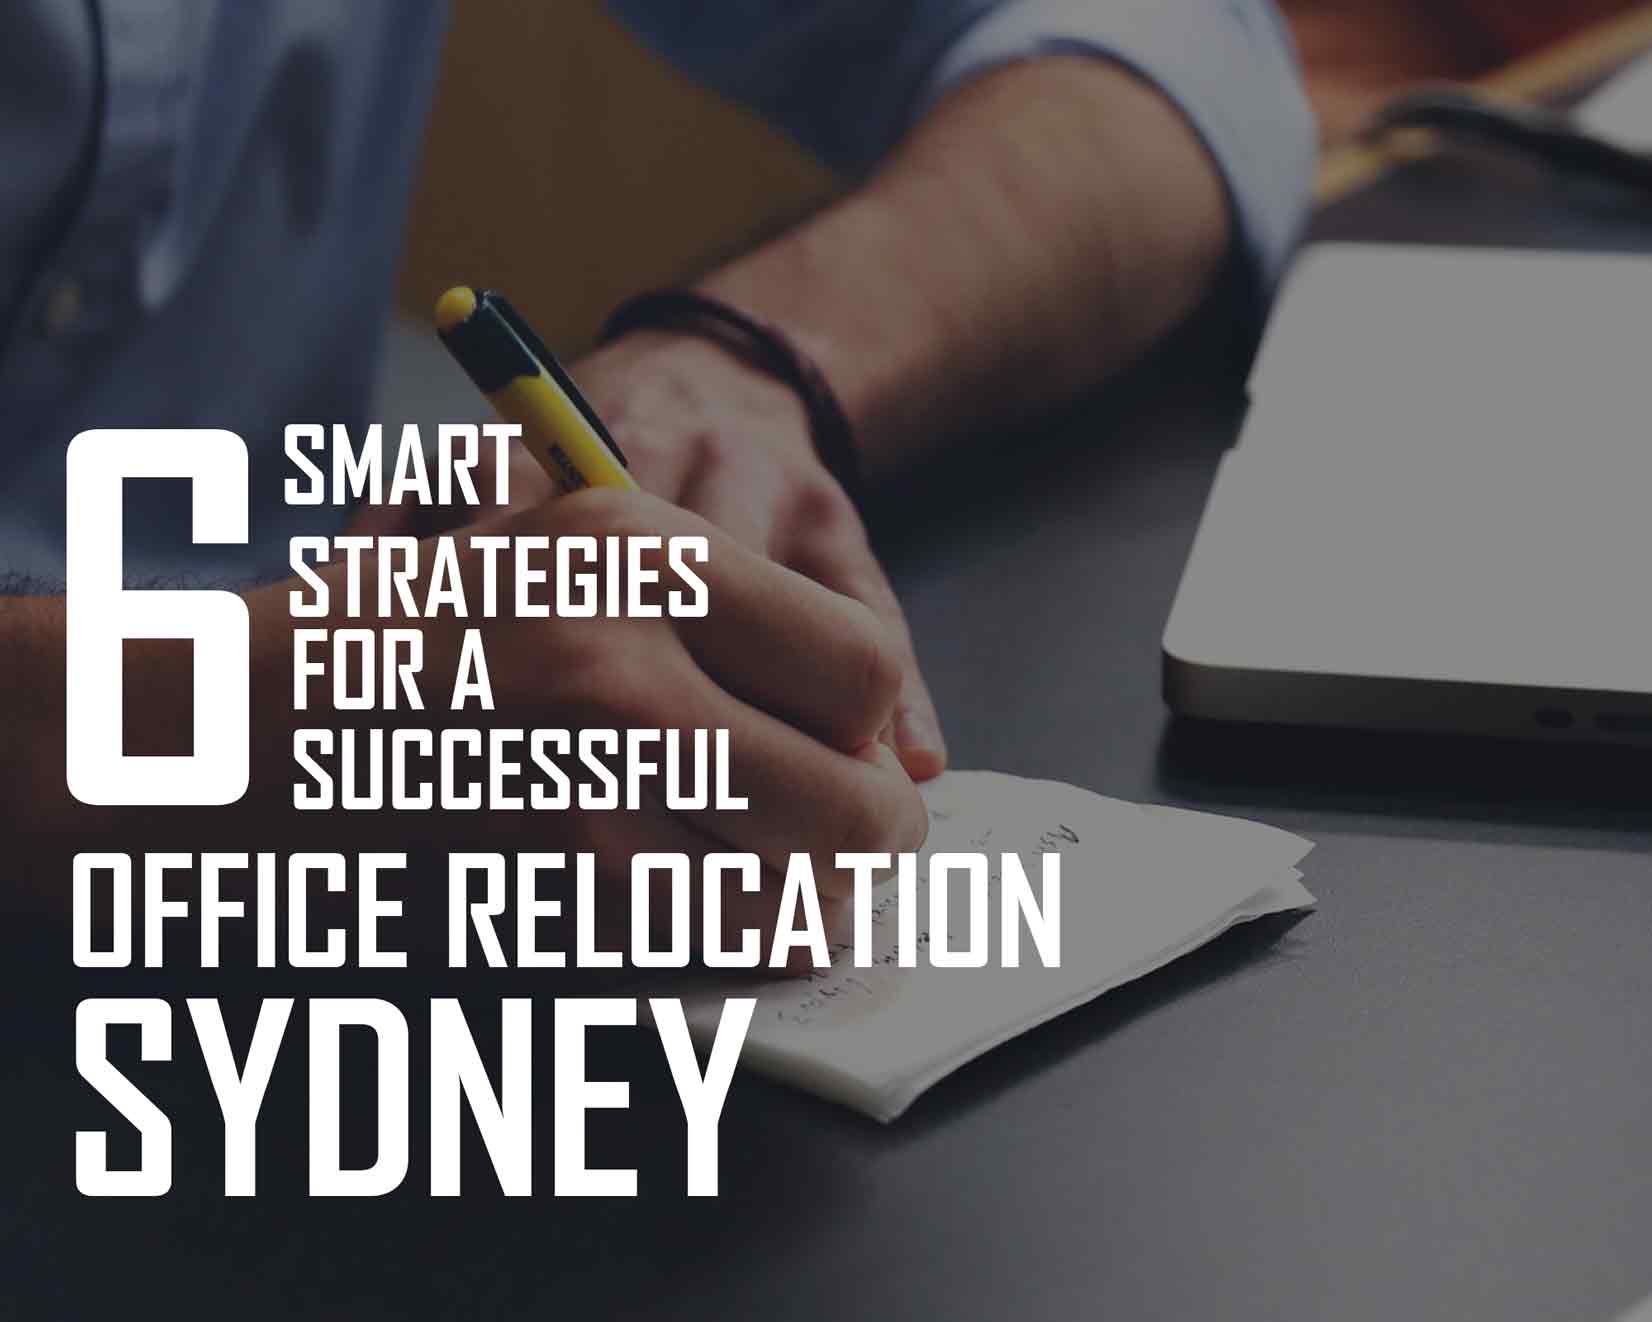 Successful Office Relocation Sydney